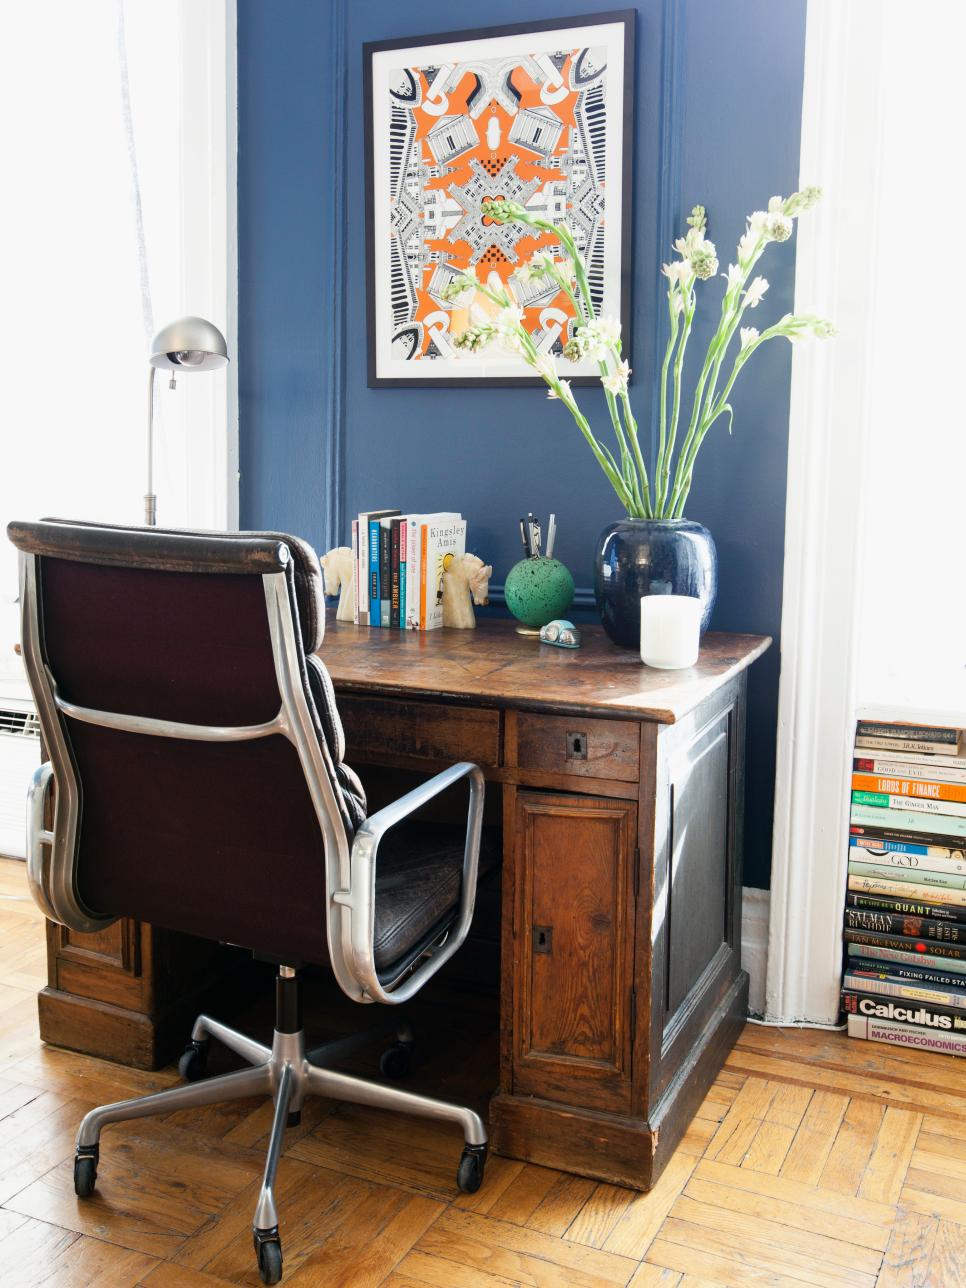 Blue Office Space With Art and Flowers